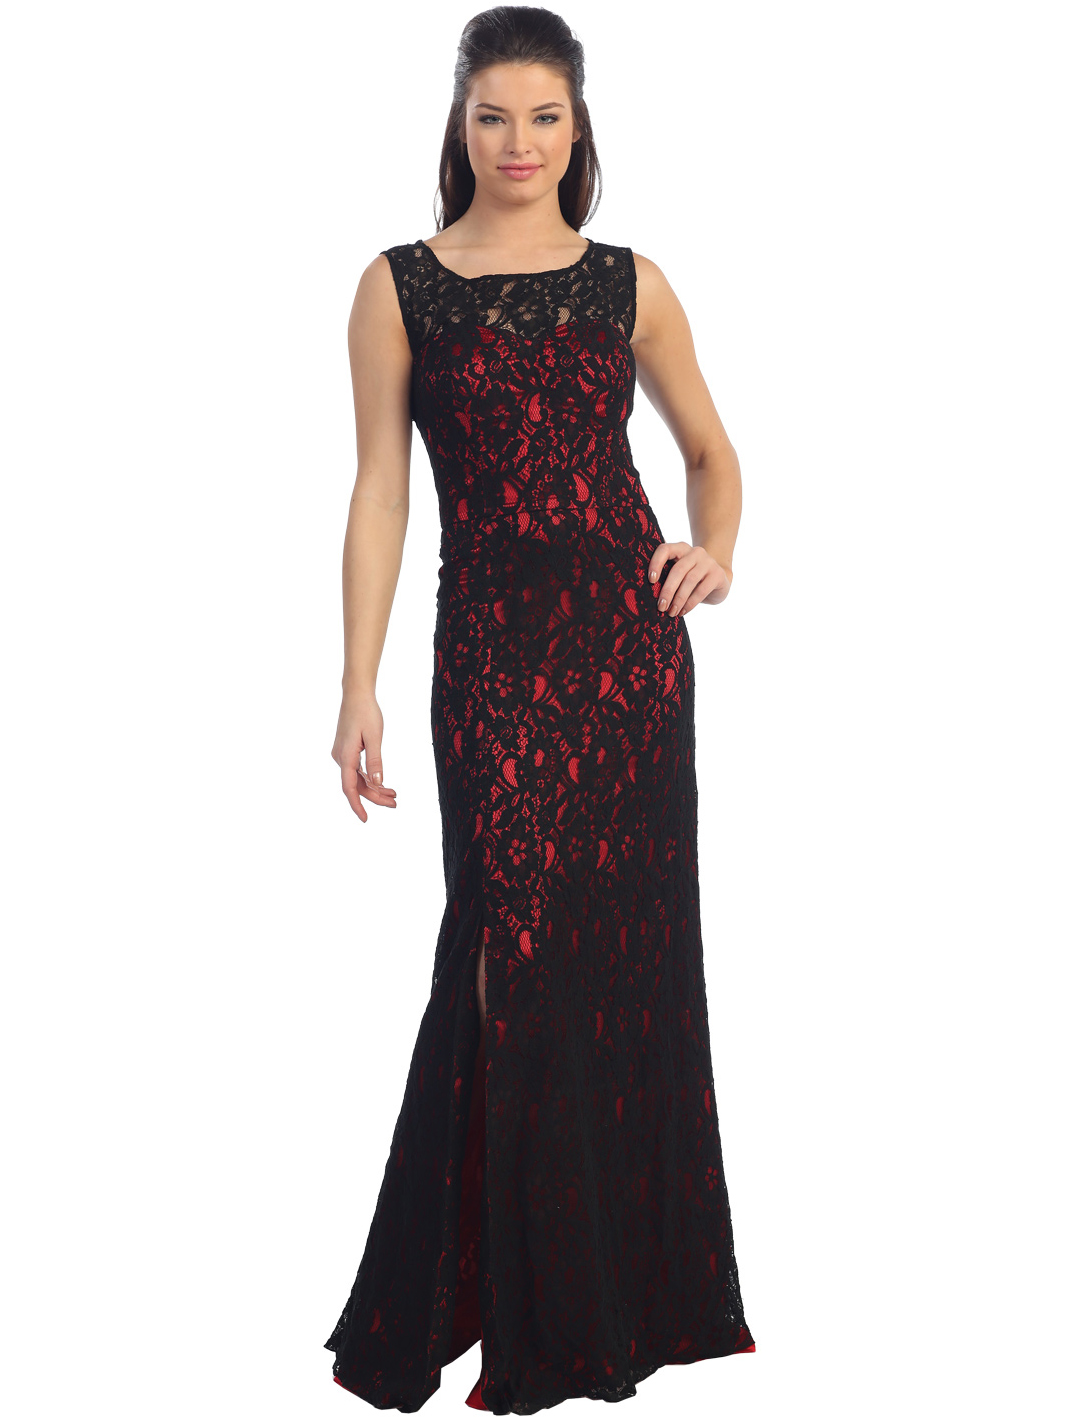 red dress with black mesh overlay prom